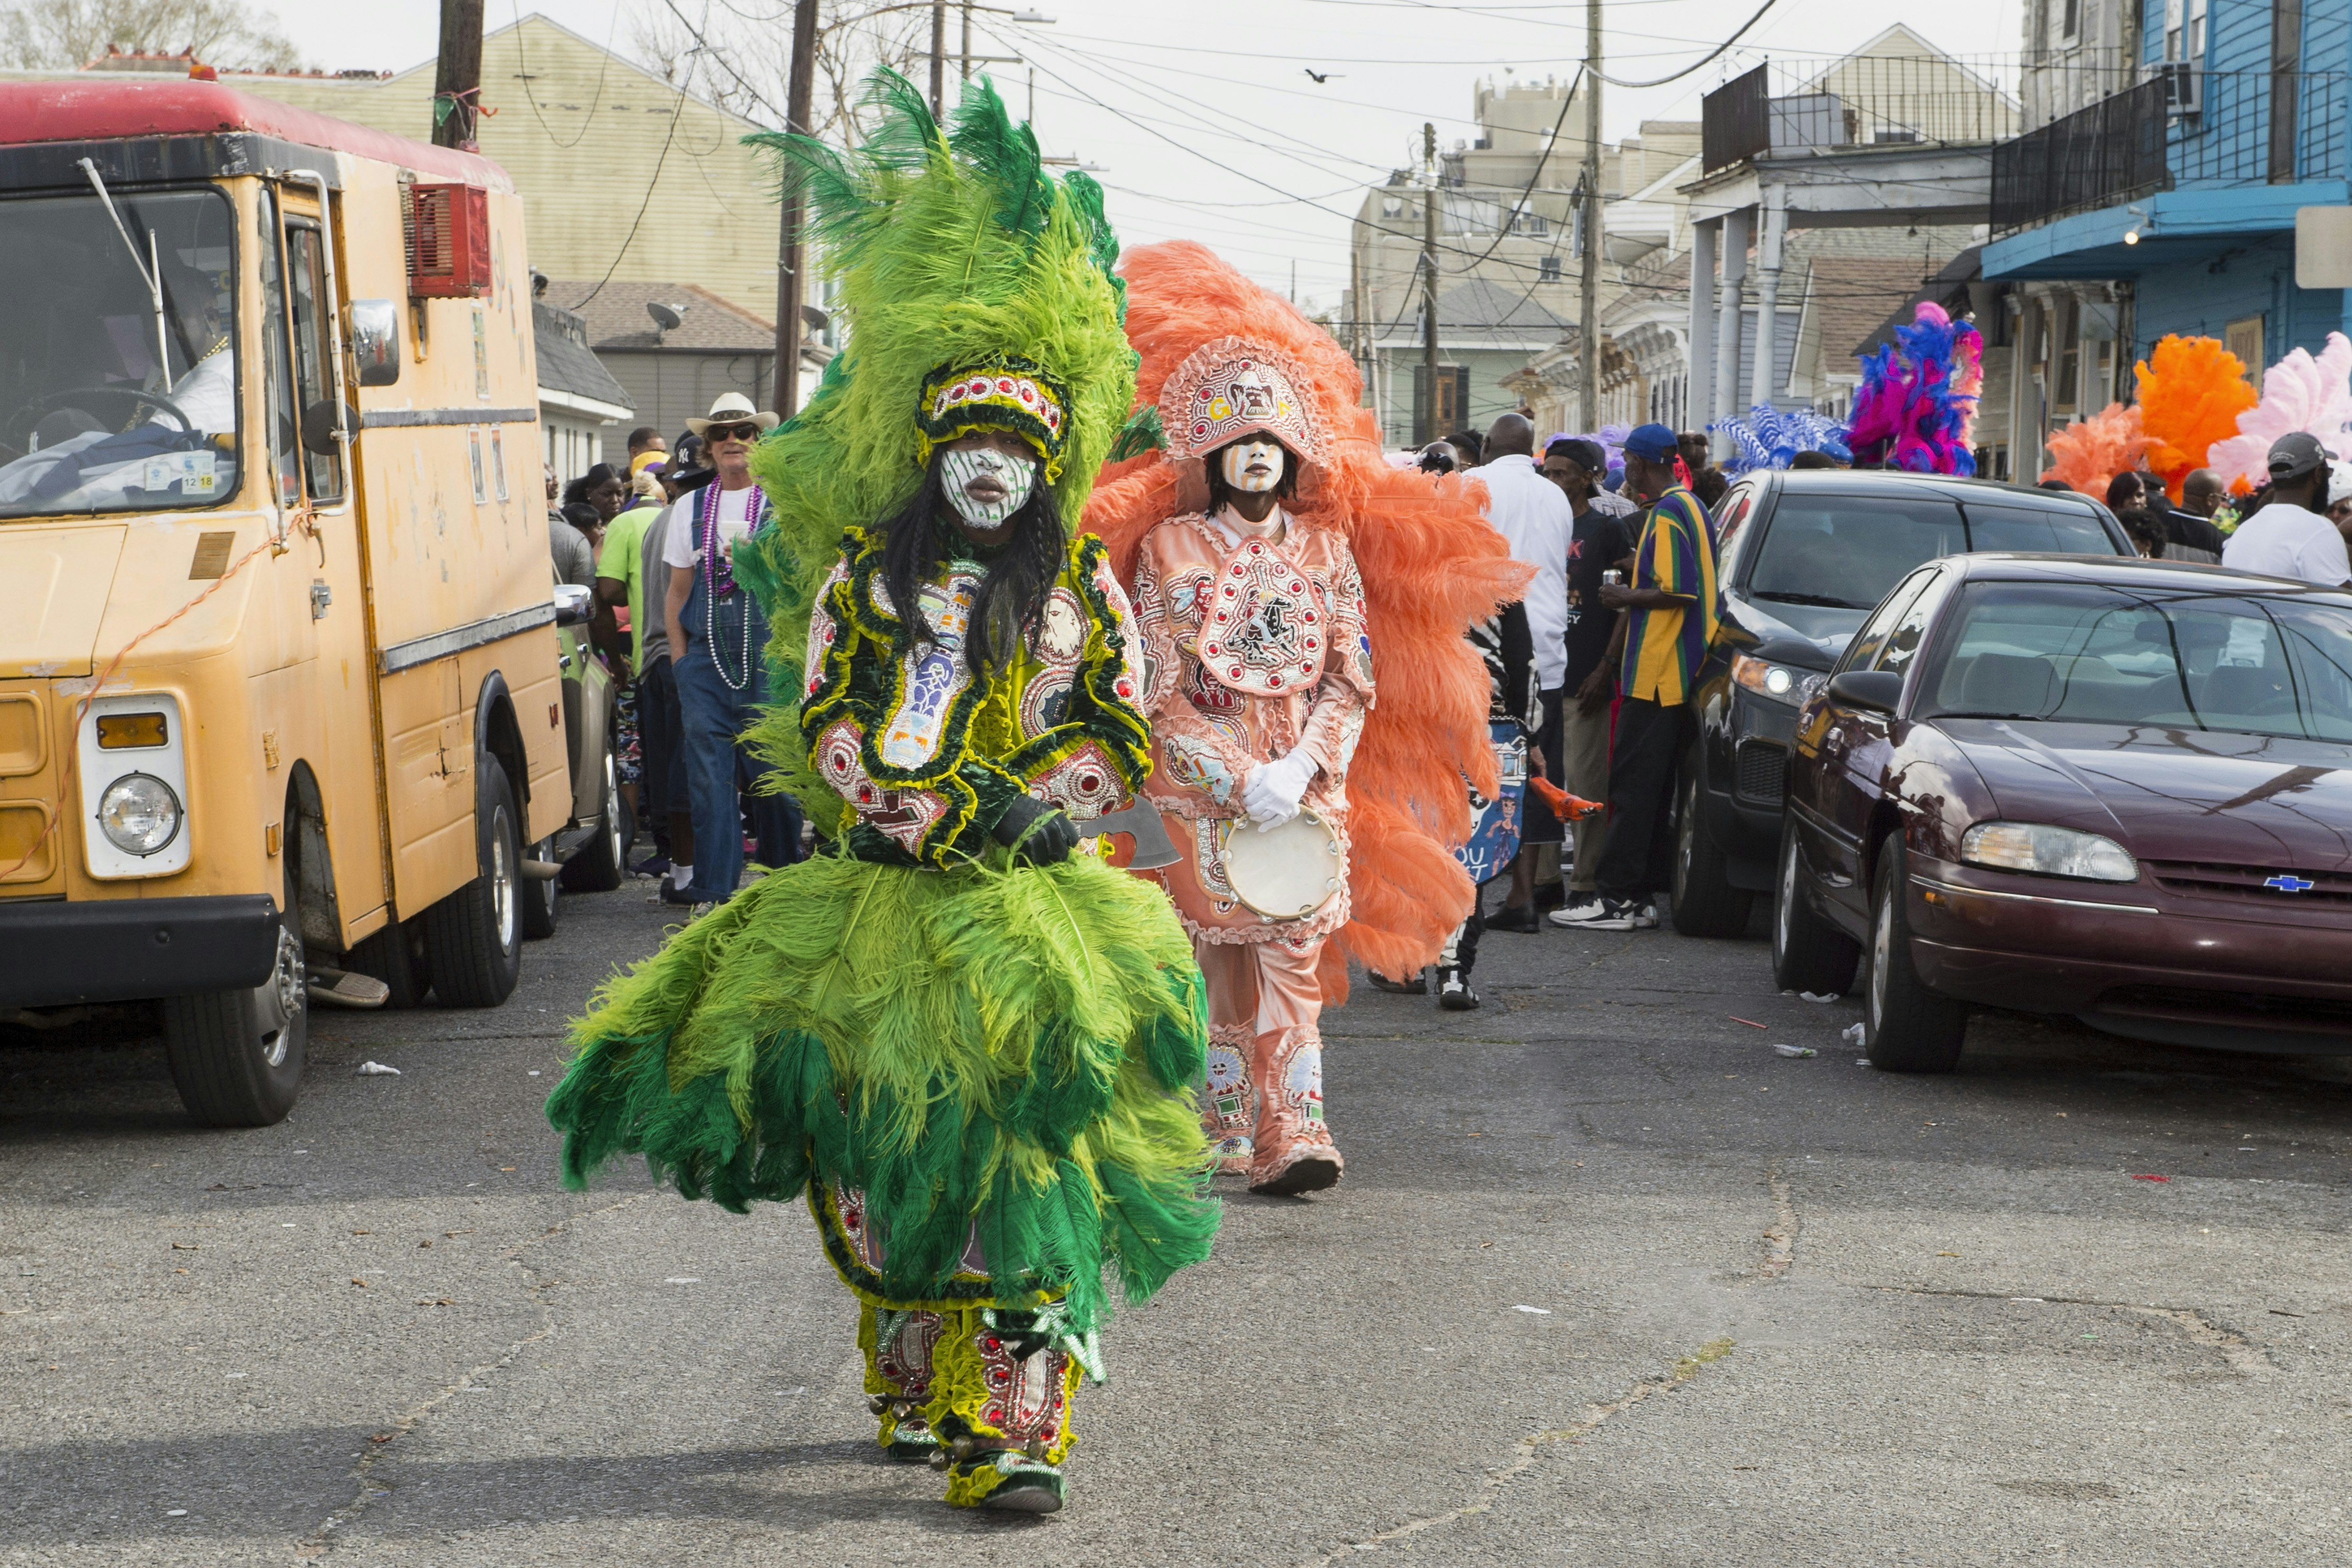 Two members of the Golden Eagles Mardi Gras Indians in elaborate beaded costumes walk through a city street. 